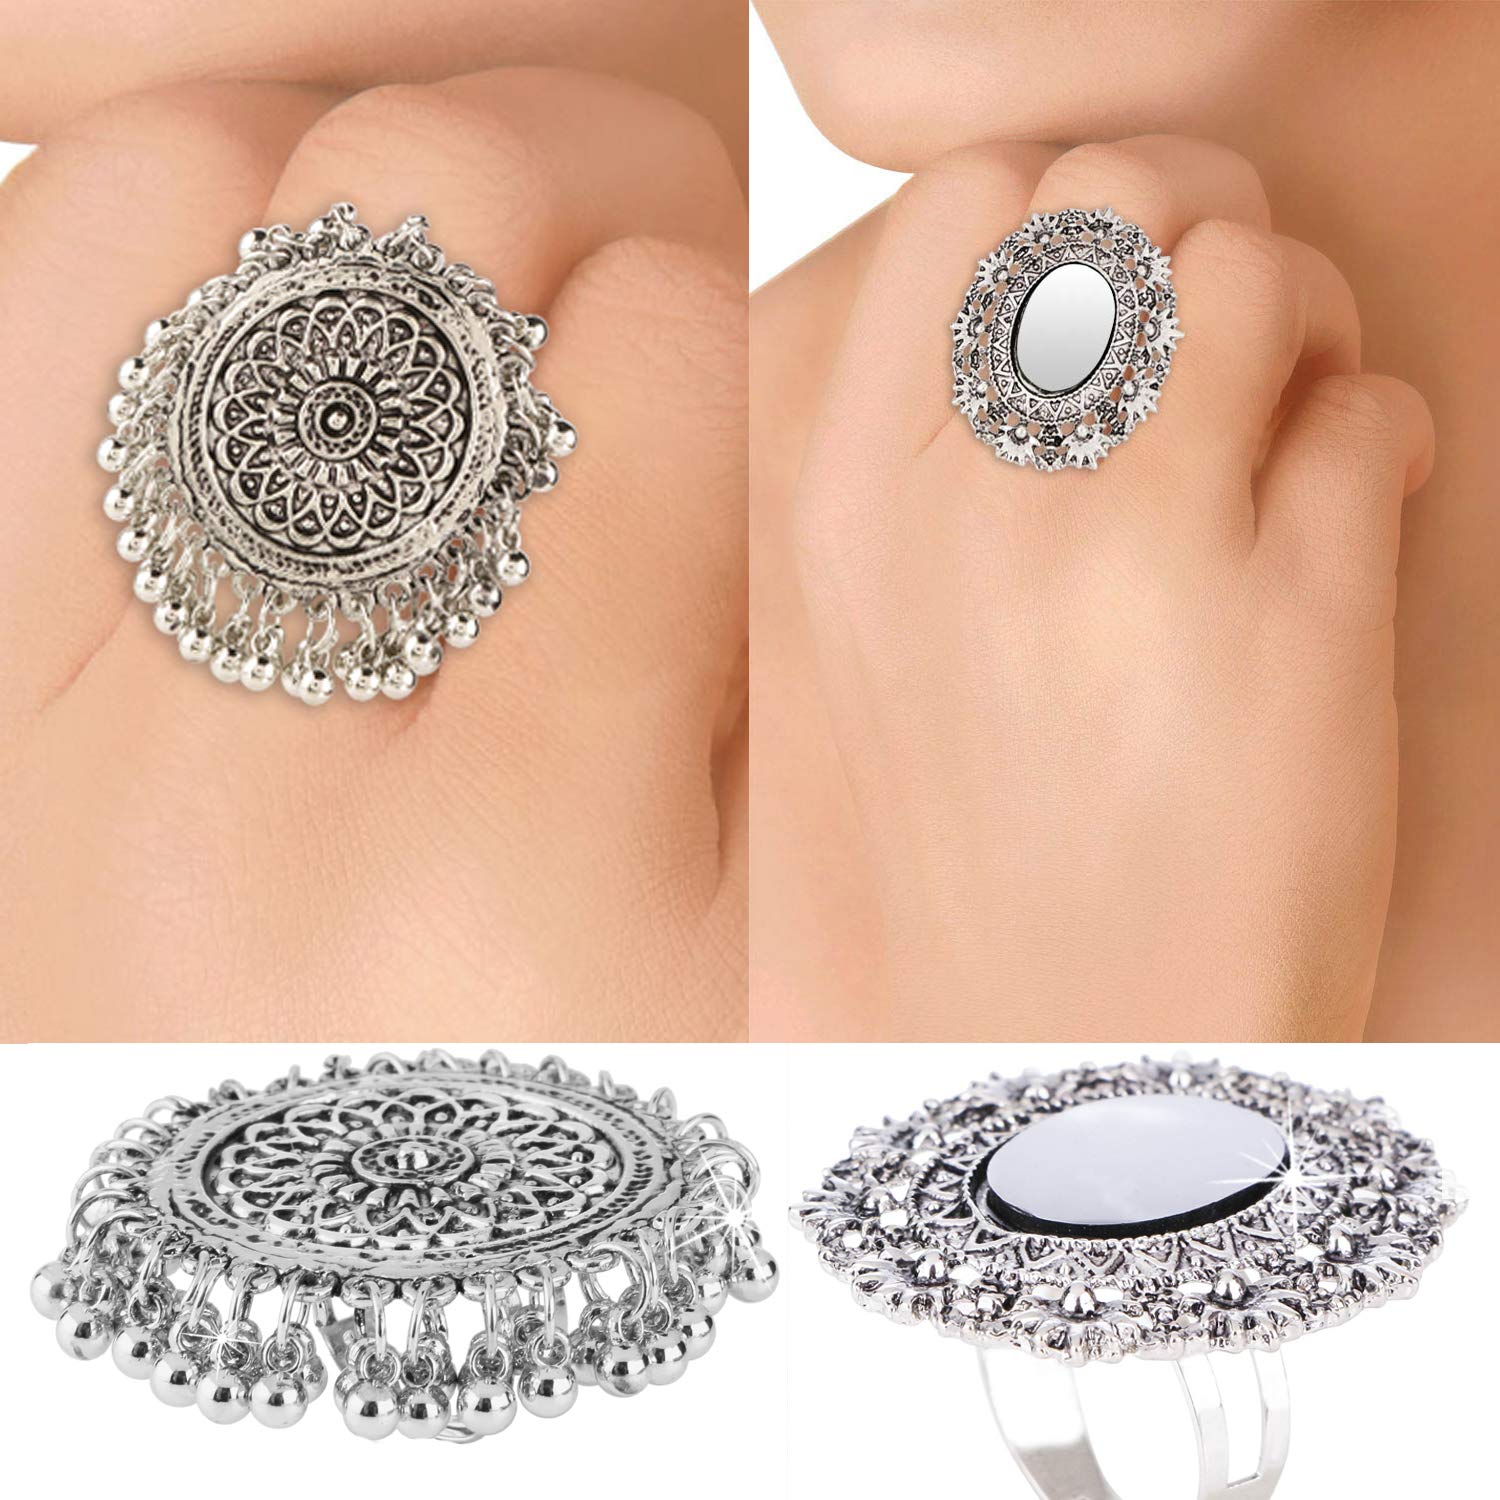 Yellow Chimes Oxidised Rings for Women 3 PCS Combo Ring Set Artistic Crafted Oxidised Silver Rings for Women and Girls.